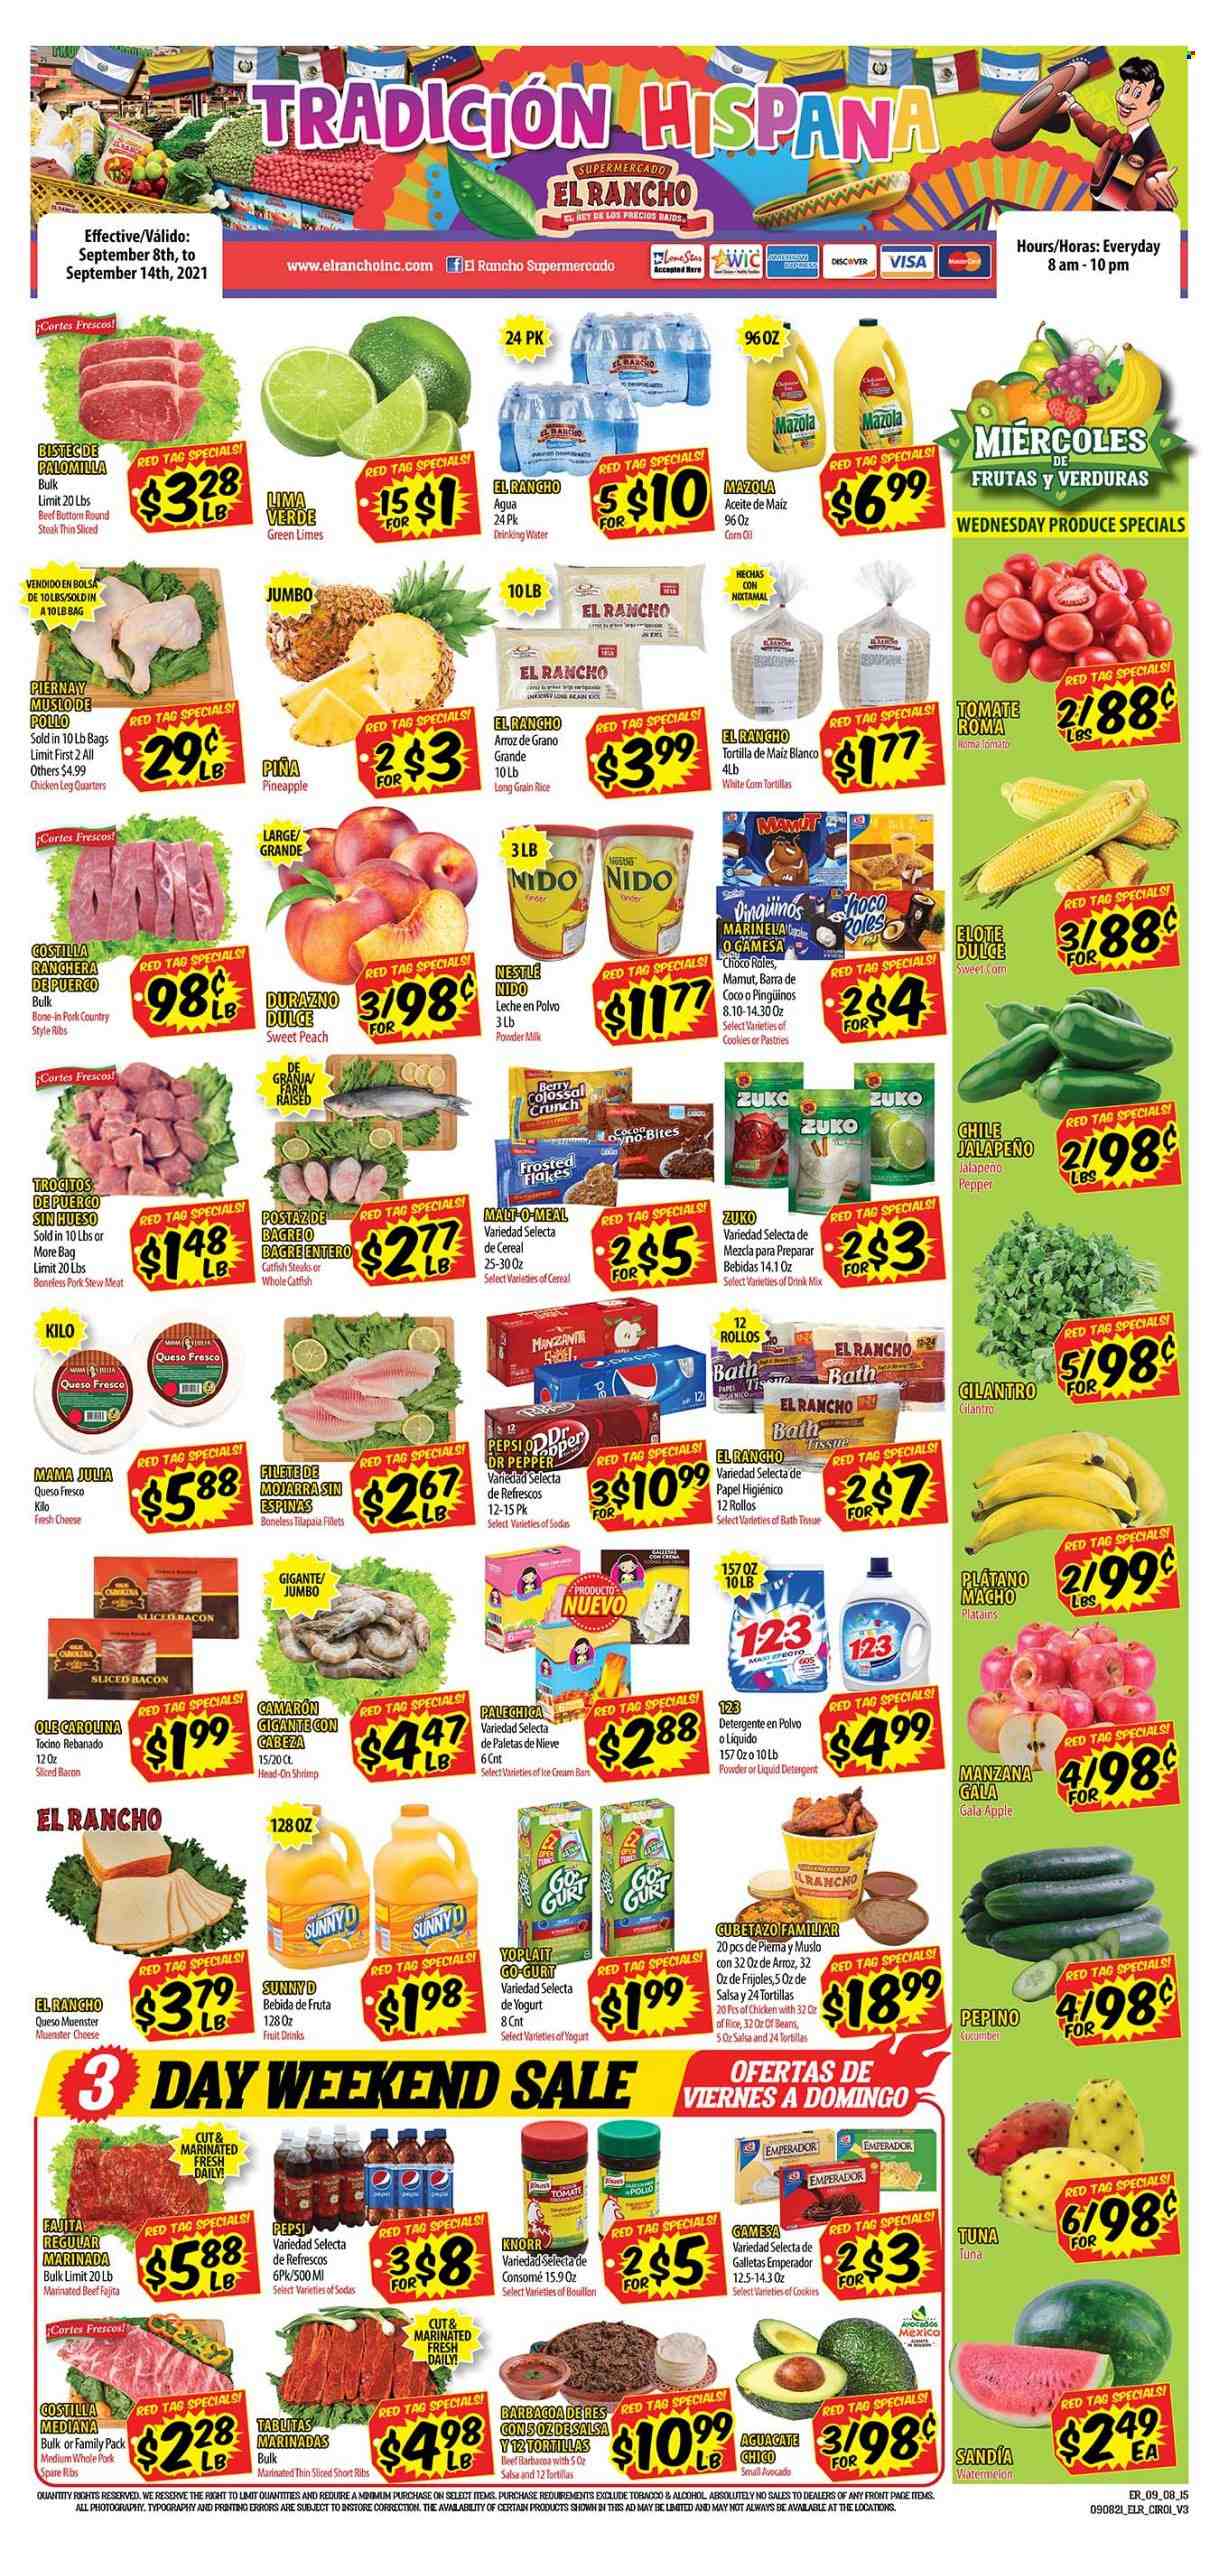 thumbnail - El Rancho Flyer - 09/08/2021 - 09/14/2021 - Sales products - stew meat, tortillas, tomatoes, jalapeño, avocado, Gala, limes, watermelon, pineapple, catfish, tuna, shrimps, Knorr, fajita, bacon, queso fresco, cheese, Münster cheese, yoghurt, Yoplait, milk, cookies, Nestlé, malt, cereals, long grain rice, cilantro, salsa, Pepsi, Dr. Pepper, alcohol, chicken legs, beef meat, steak, round steak, marinated beef, pork meat, pork ribs, pork spare ribs, country style ribs. Page 1.